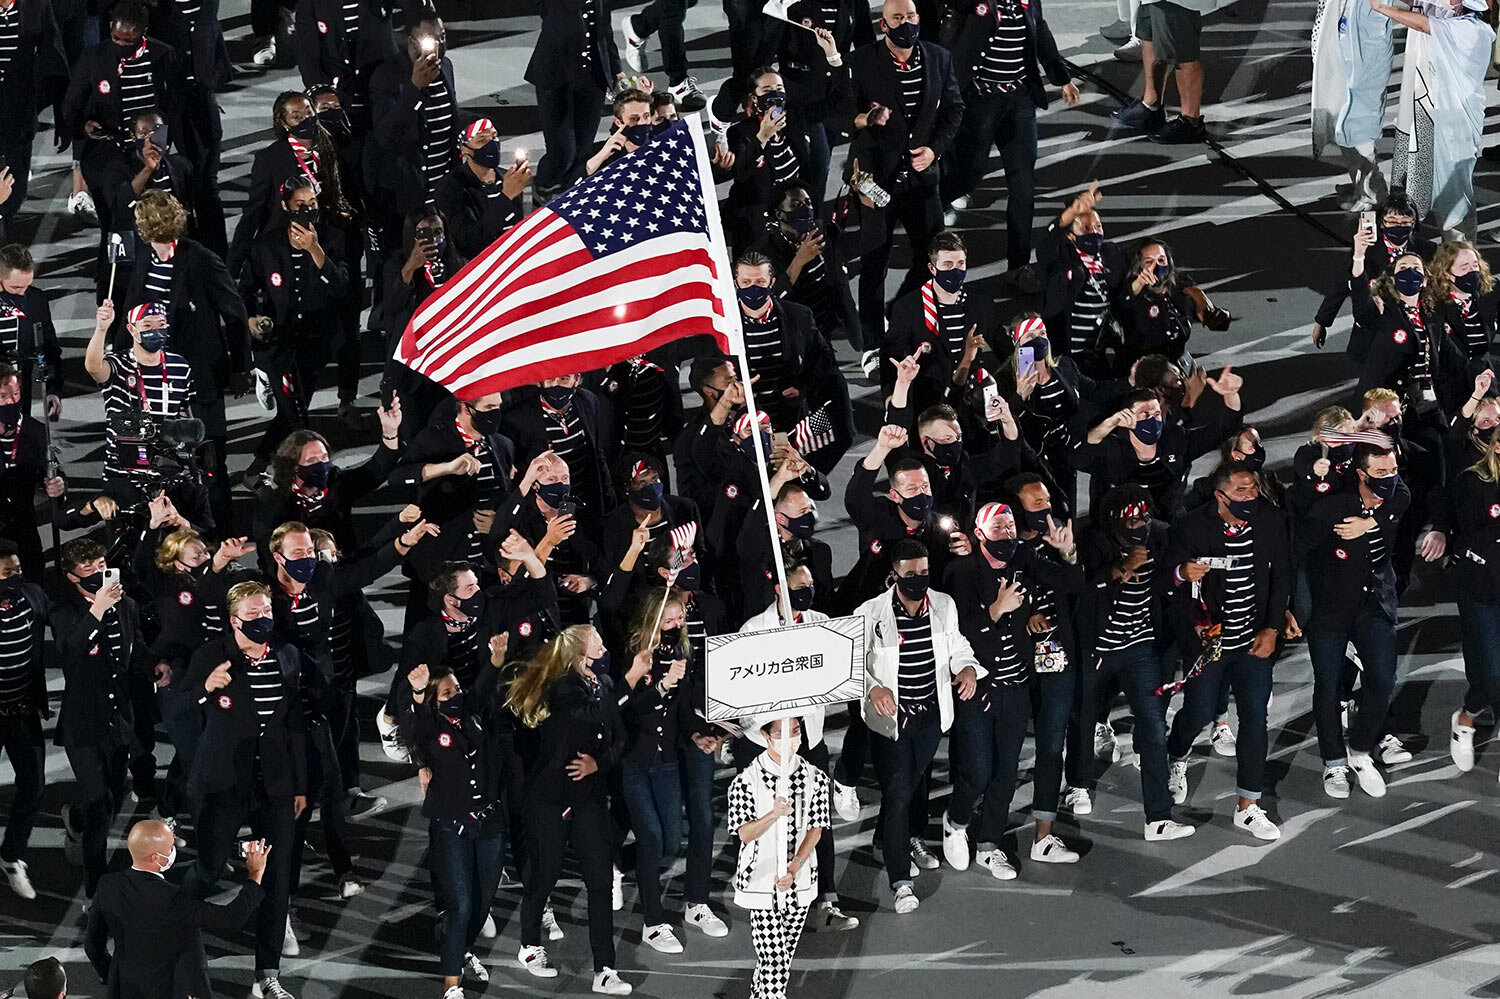  Sue Bird and Eddy Alvares, of the United States of America, carry their country's flag during the opening ceremony at the Olympic Stadium at the 2020 Summer Olympics, Friday, July 23, 2021, in Tokyo. (AP Photo/Morry Gash) 